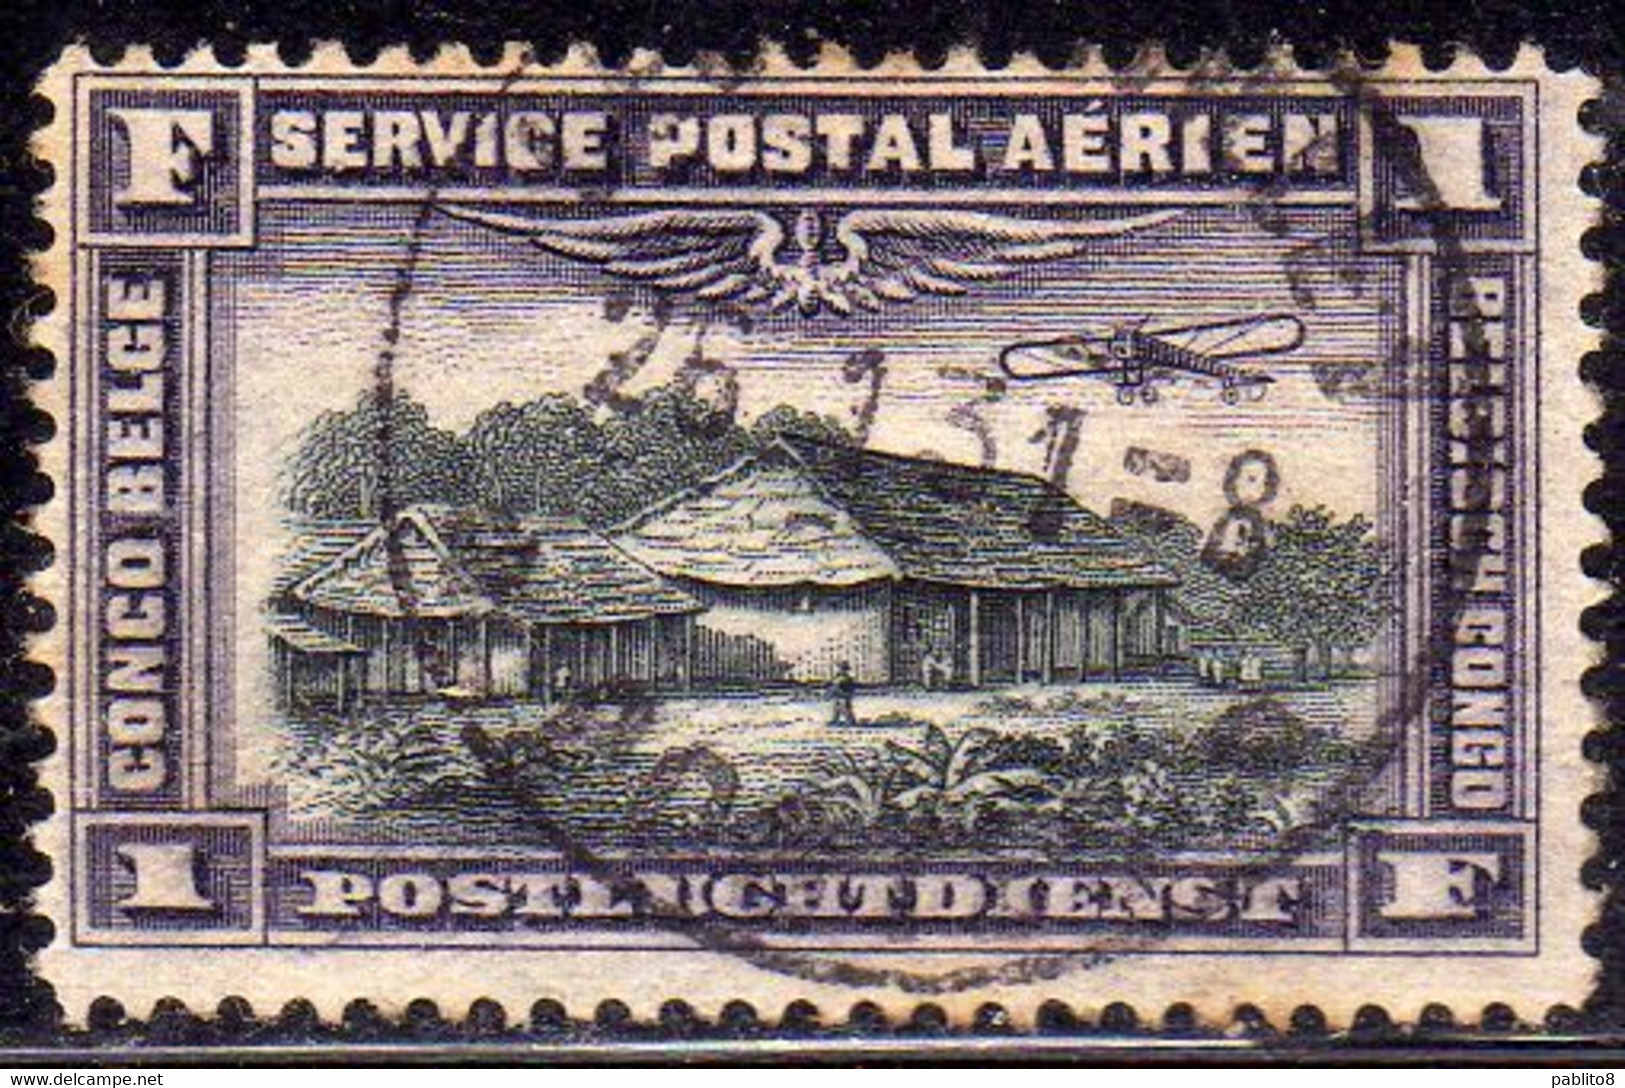 BELGIAN CONGO BELGA BELGE 1920 AIR POST STAMPS SERVICE POSTAL AERIEN COUNTRY STORE 1fr USED OBLITERE' USATO - Used Stamps